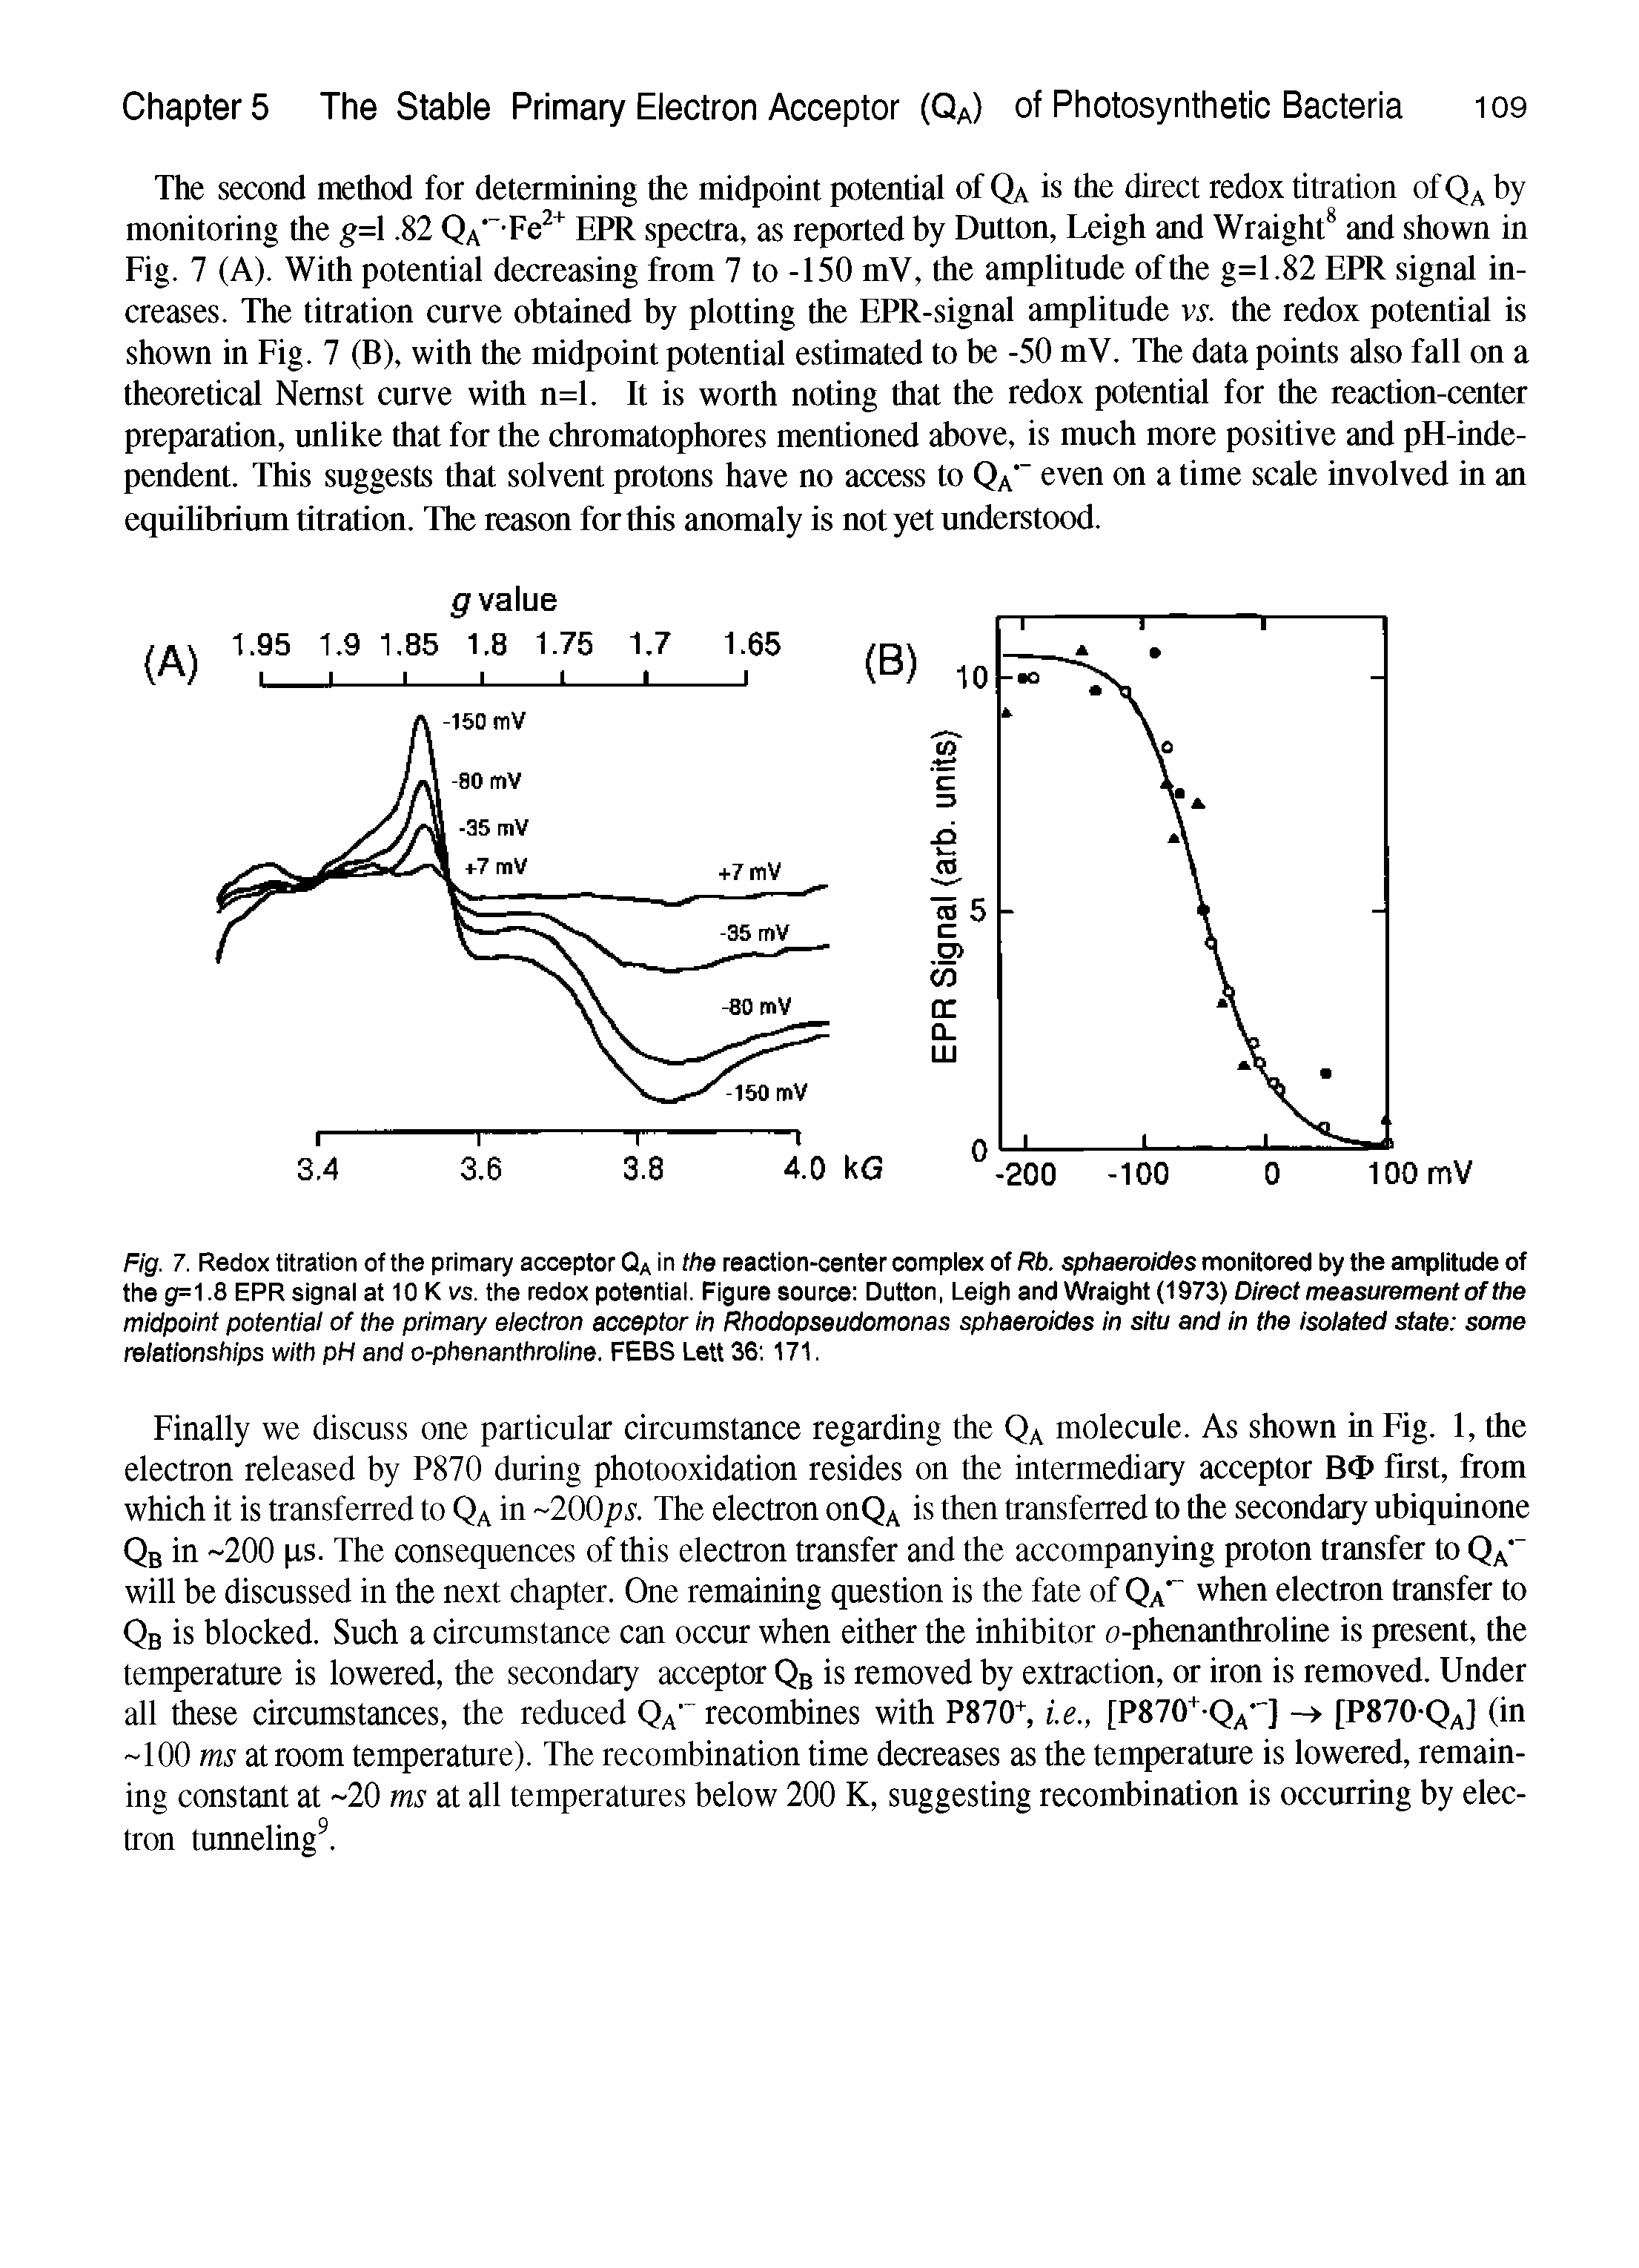 Fig. 7. Redox titration of the primary acceptor Qa in ths reaction-center compiex of Rb. sphaeroides monitored by the amplitude of the g= S EPR signal at 10 K vs. the redox potential. Figure source Dutton, Leigh and Wraight (1973) Direct measurement of the midpoint potentiai of the primary electron acceptor in Rhodopseudomonas sphaeroides in situ and in the isolated state some relationships with pH and o-phenanthroline. FEES Lett 36 171.